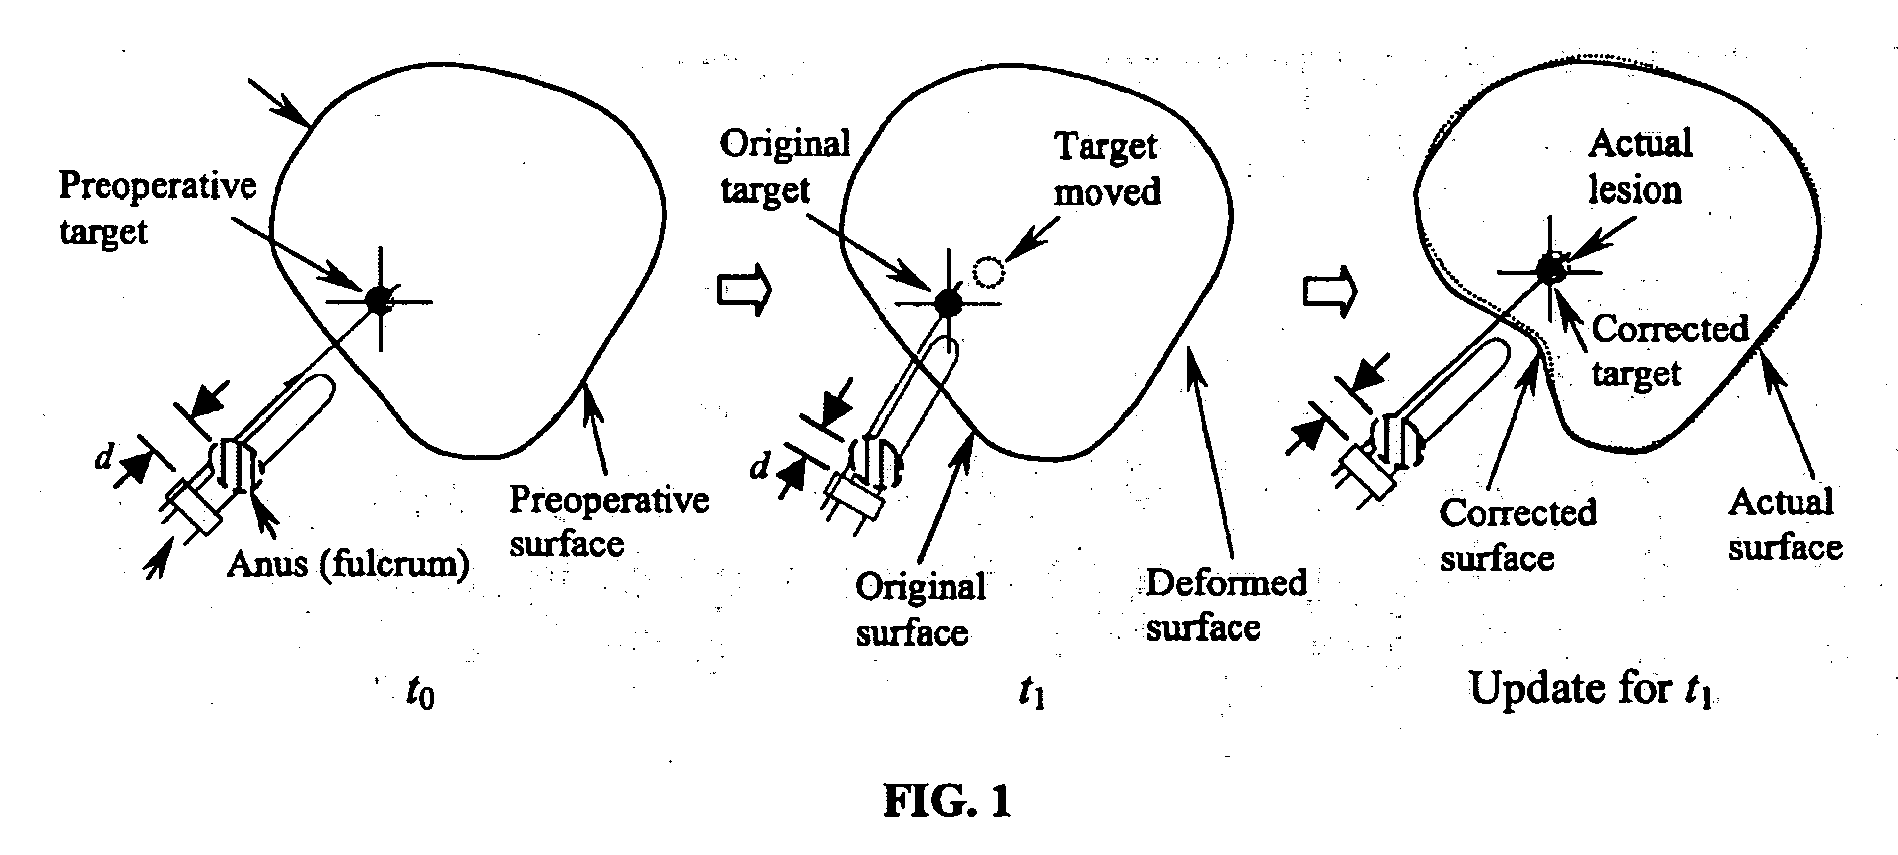 Apparatus for guiding towards targets during motion using GPU processing